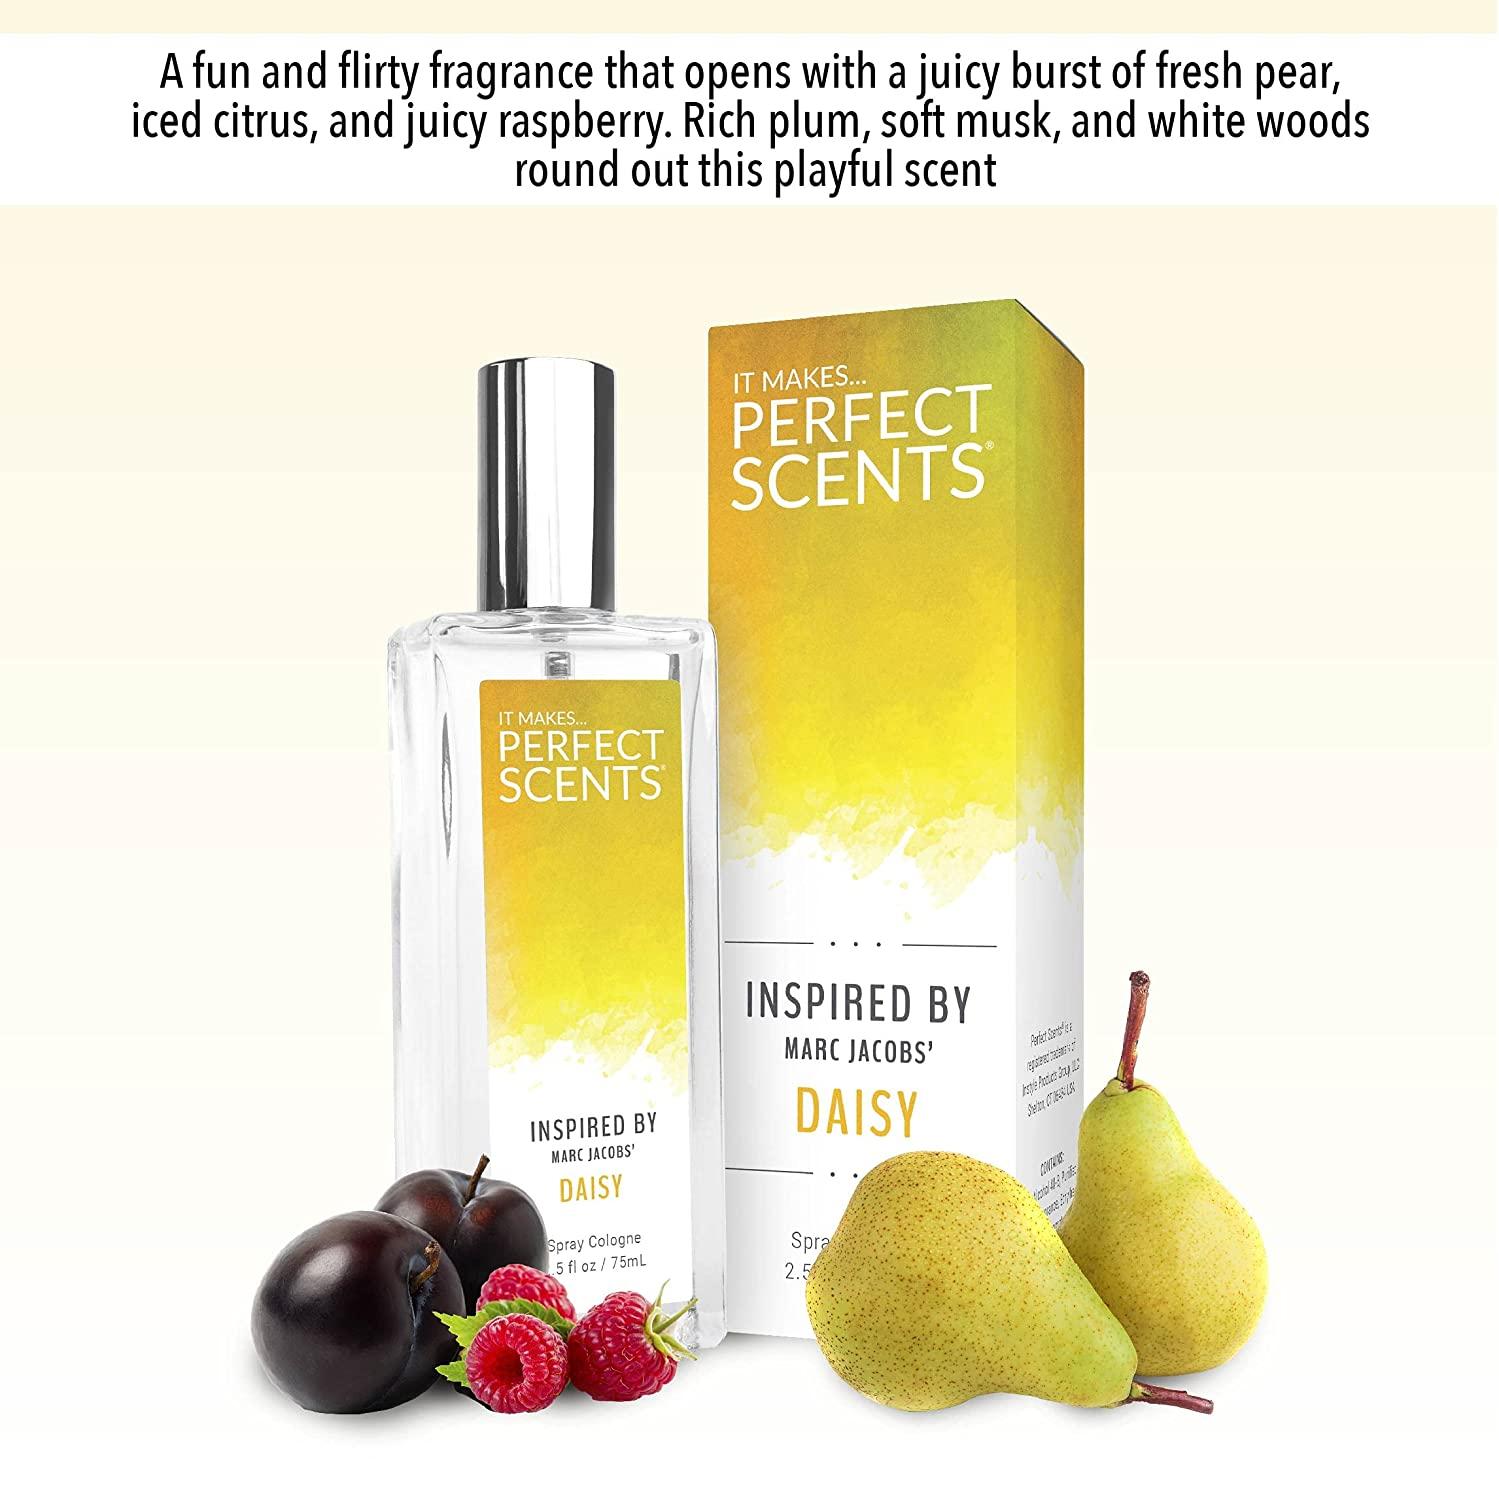 Perfect Scents Inspired by Beautiful Spray Cologne 2.5 fl oz